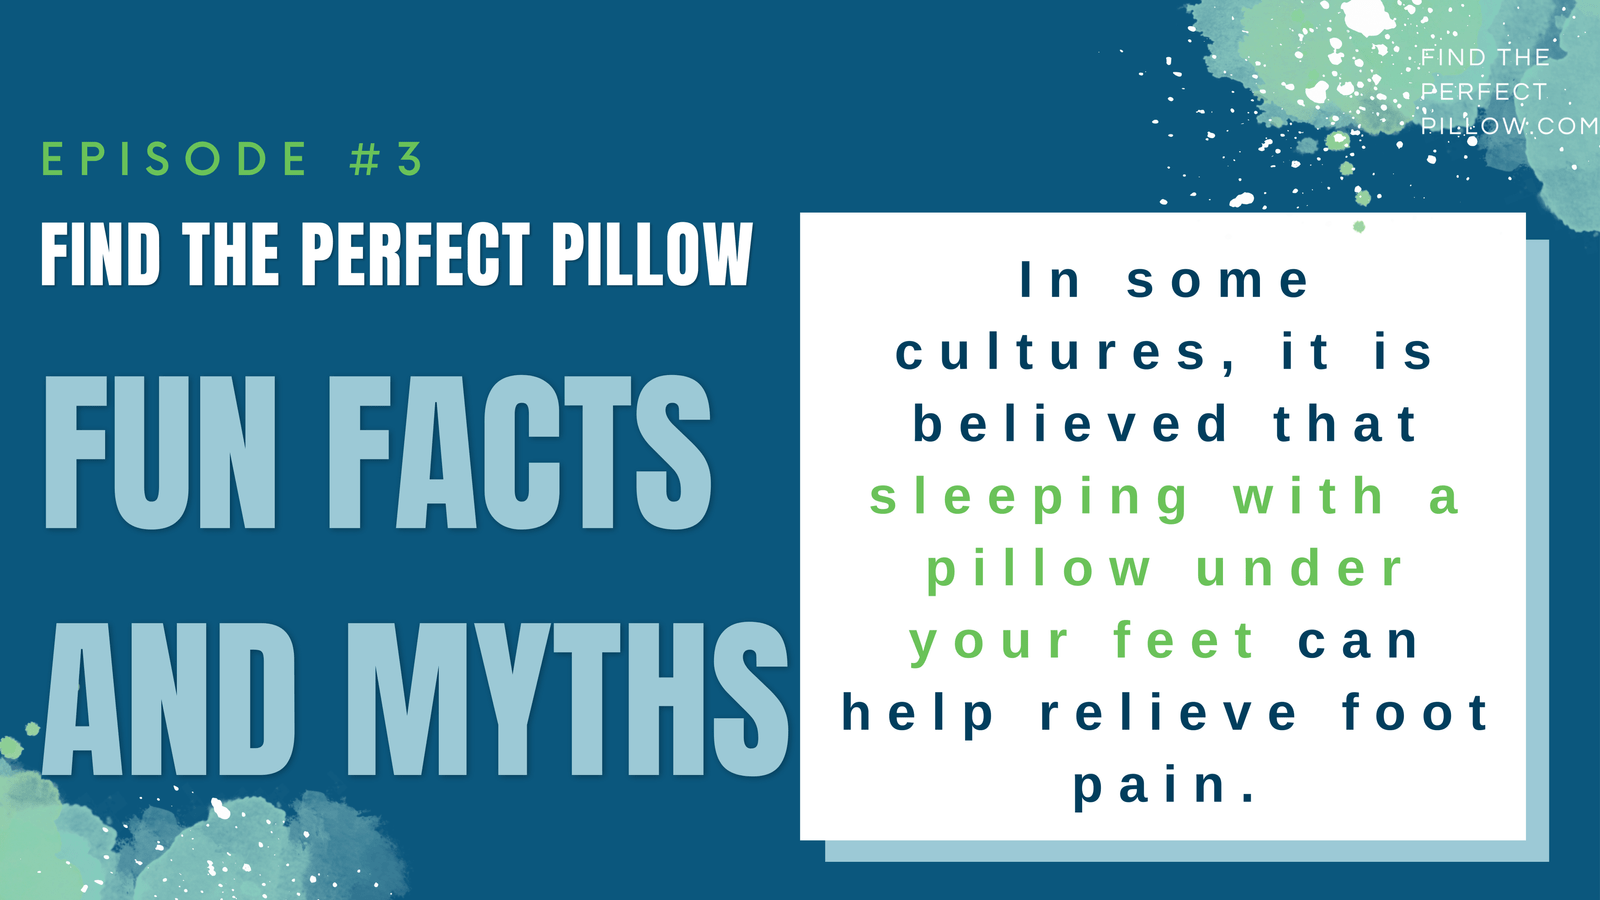 Pillow Fun Facts & Myths: Relieve Foot Pain with a Pillow!